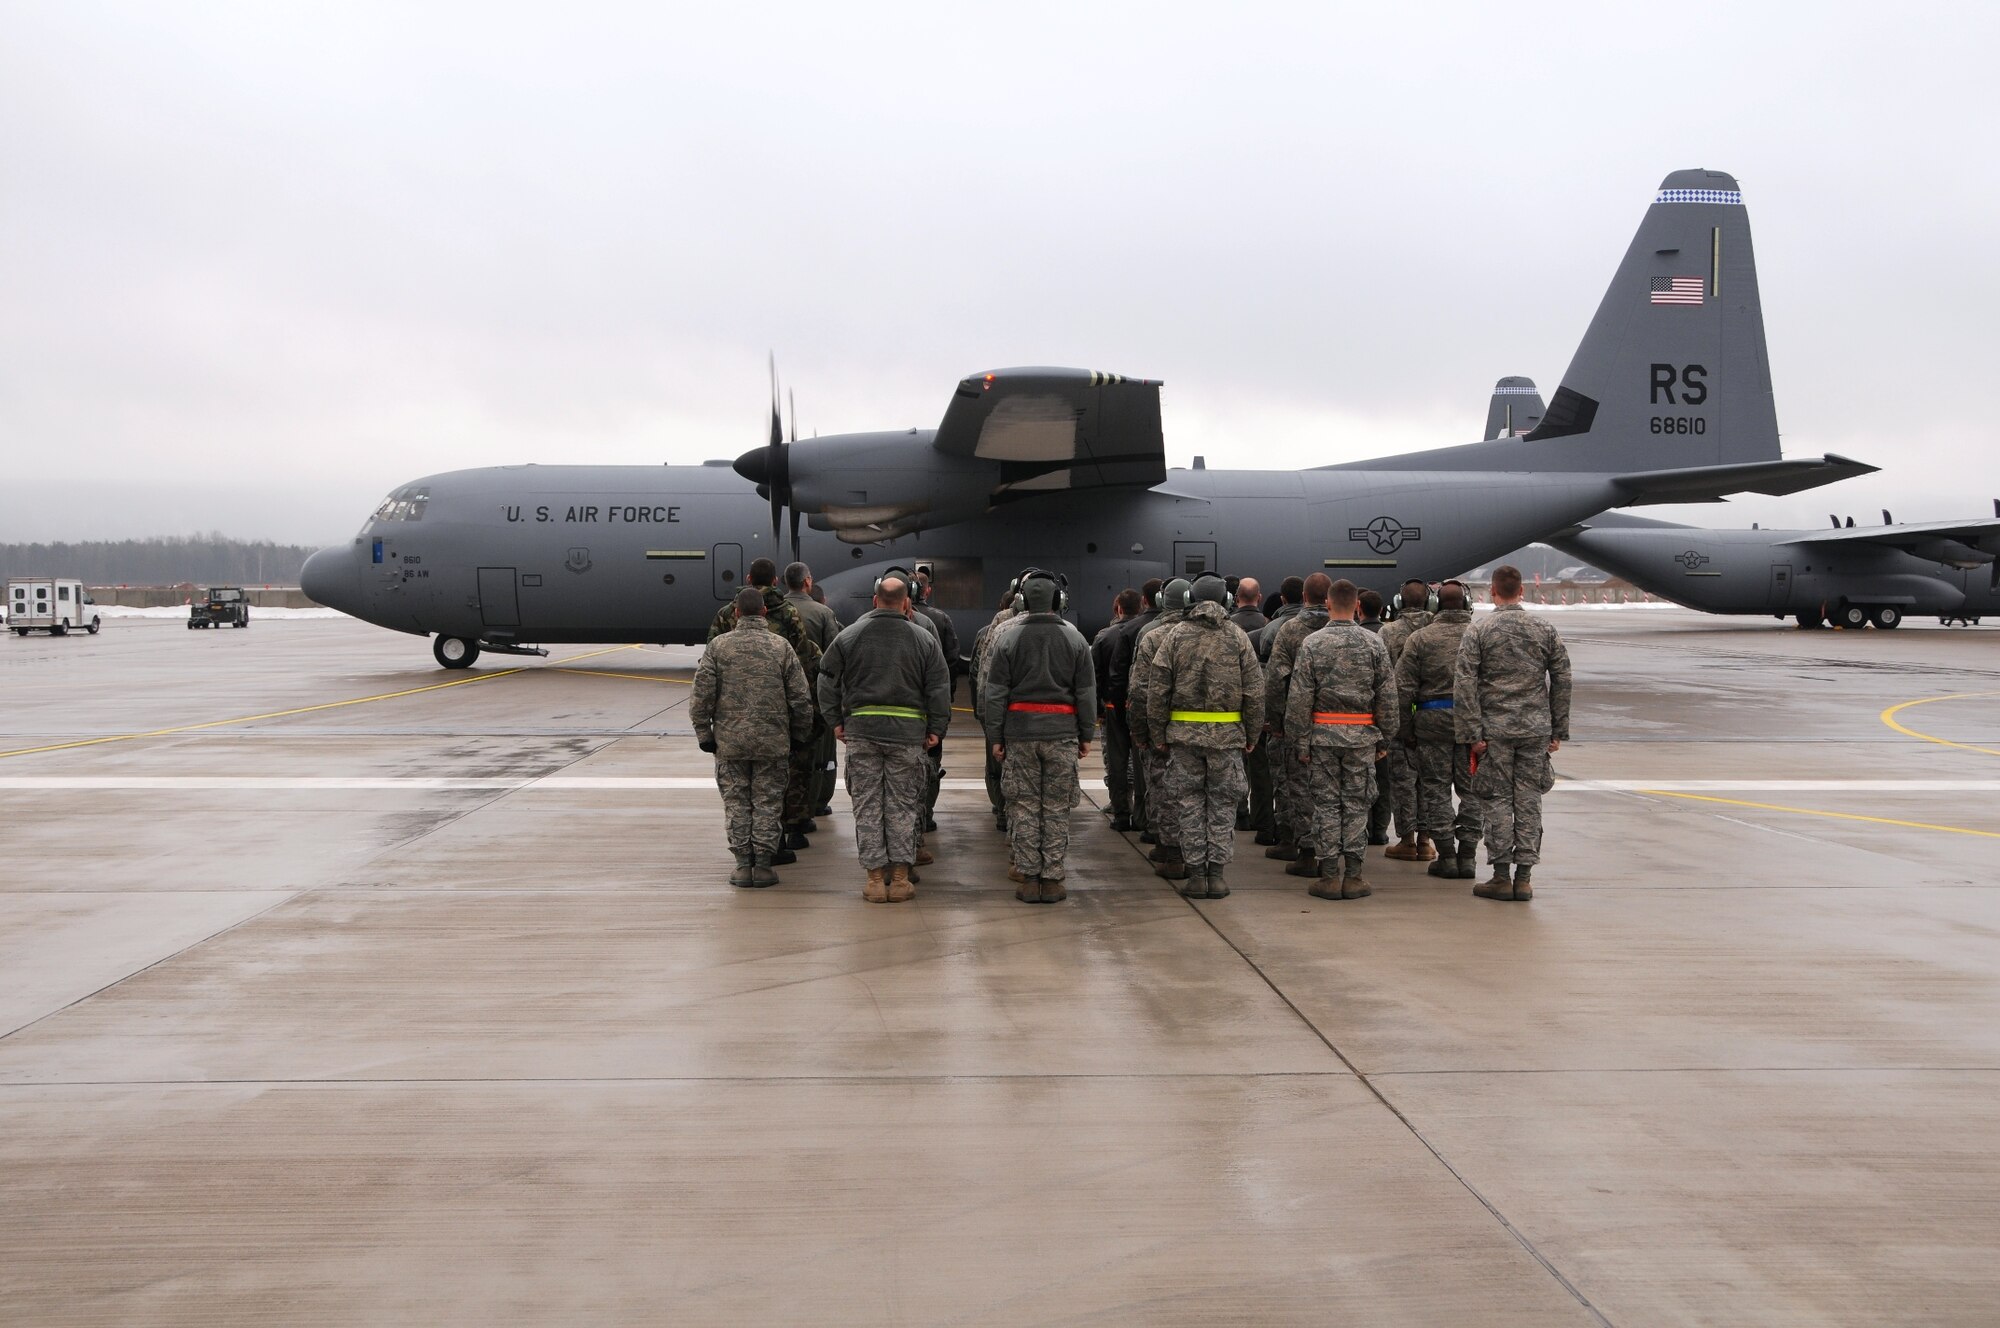 RAMSTEIN AIR BASE, Germany -- Members of the 86th Aircraft Maintenance Squadron join aircrew from the 37th Airlift Squadron to welcome the new C-130J Super Hercules flown by 17th Air Force Vice Commander Brig. Gen. Michael Callan. (USAF photo by Master Sgt. Jim Fisher)